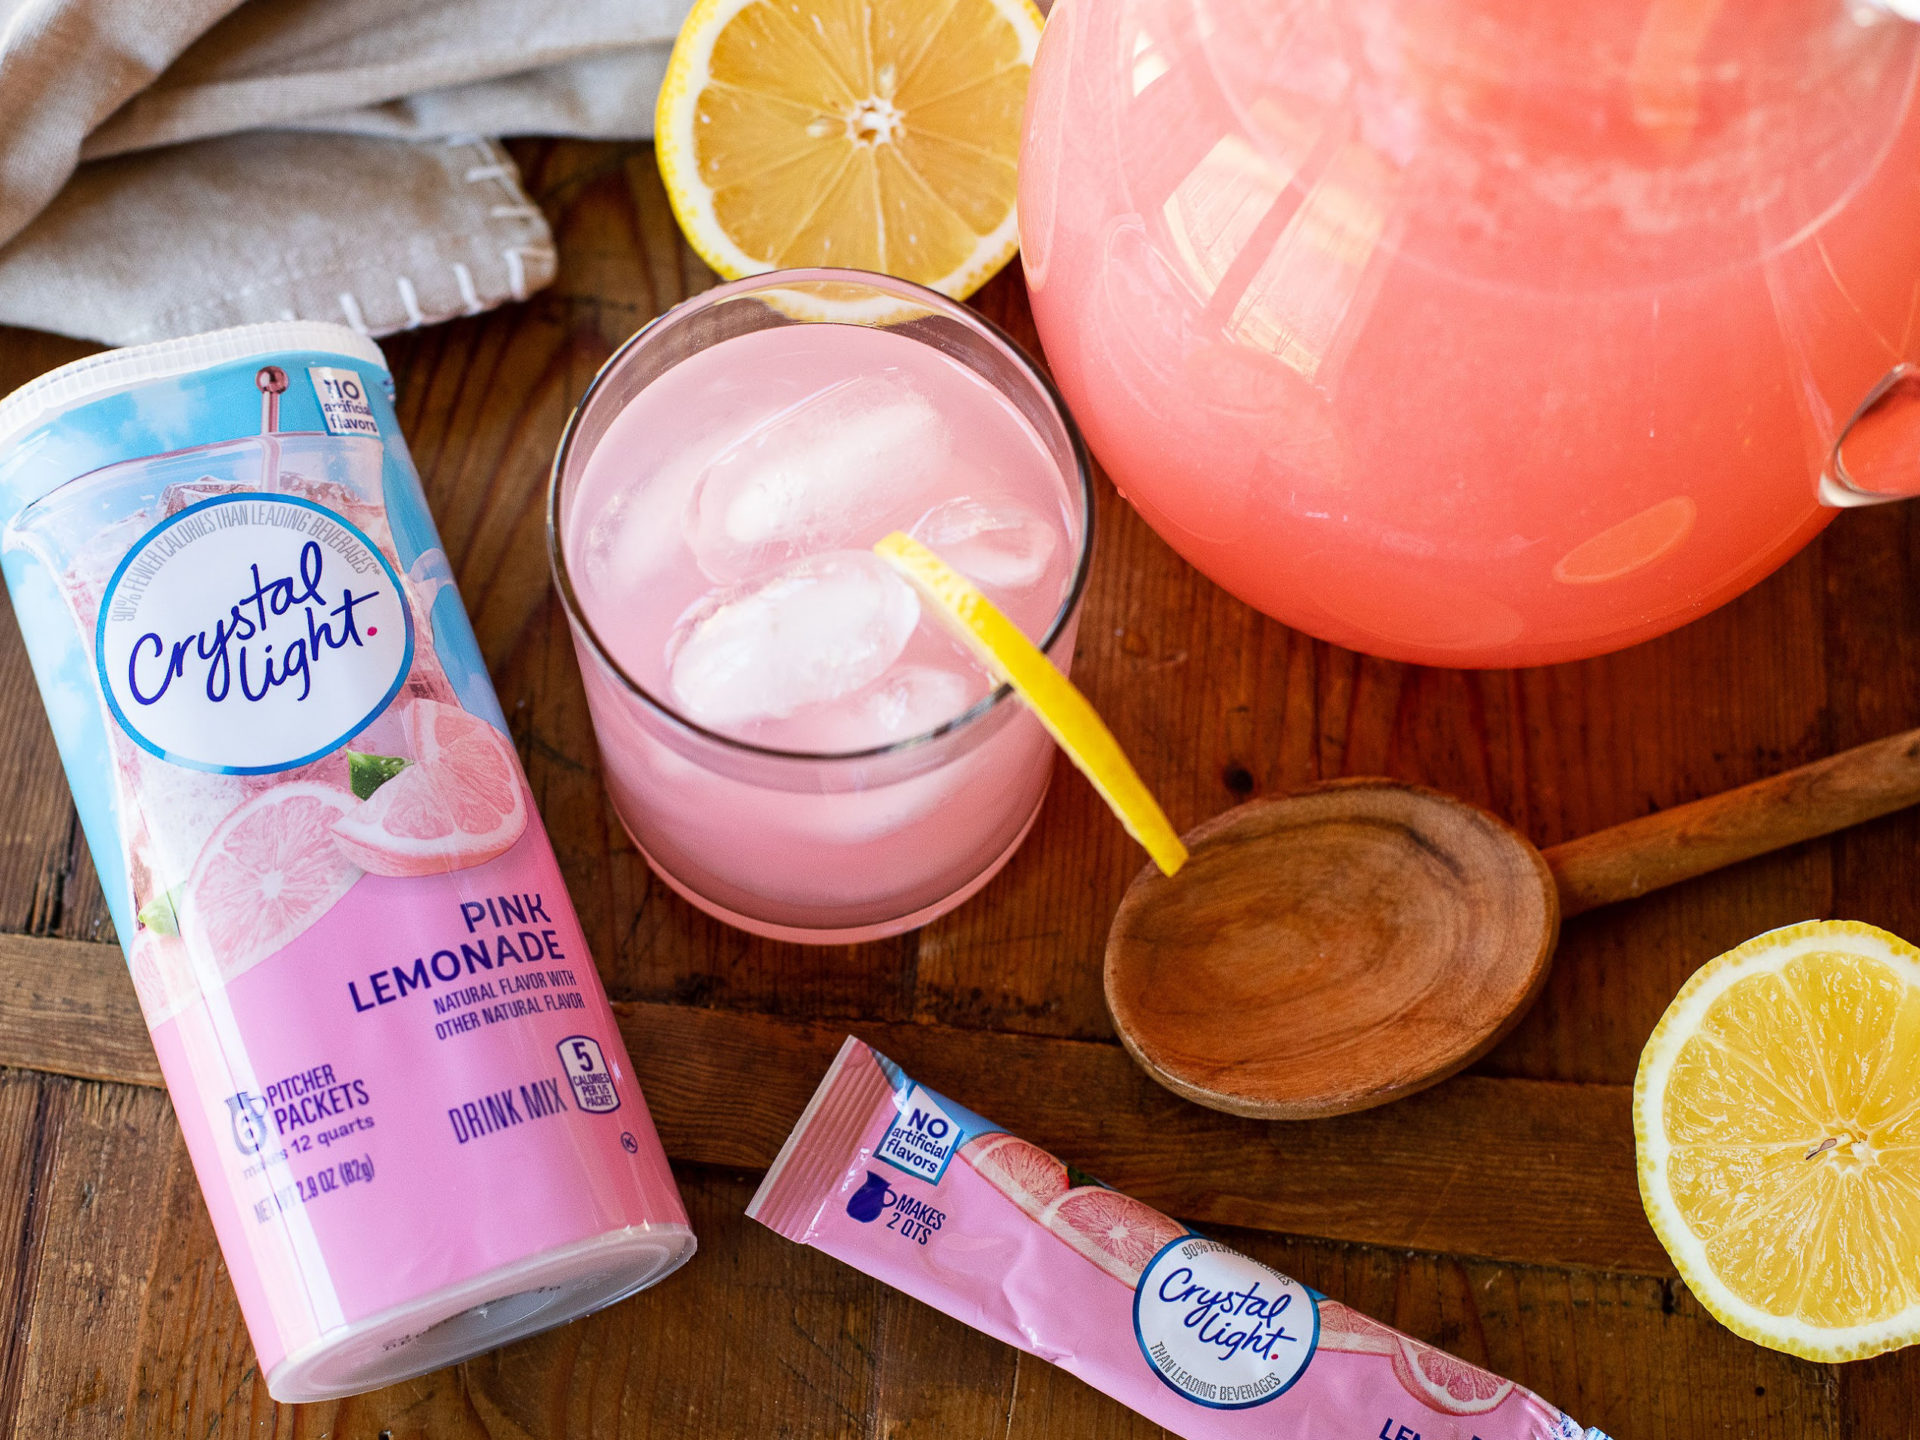 Get Crystal Light Drink Mixes For As Low As $1.24 At Kroger